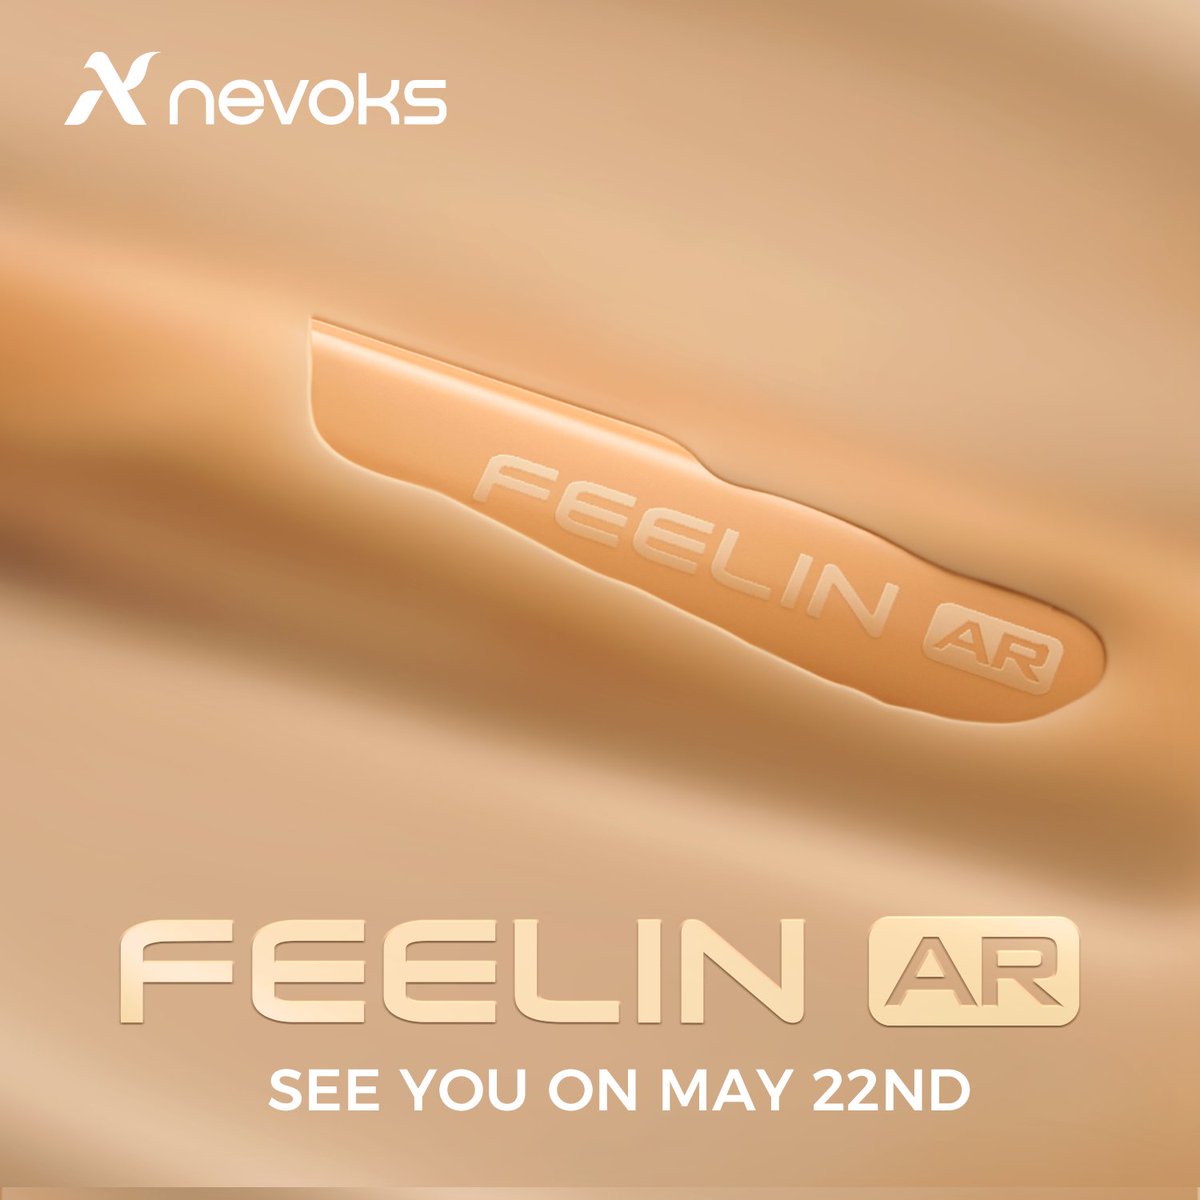 ✨ Stunning look and comfortable to hold. Want to explore more? Stay tuned 📅—see you in two days! . . . #excitingreveal #comingsoon #vapelife #nevoks #nevoksfeelin #newnevoks #newproduct #productlaunch #feelinpod #vapecommunity